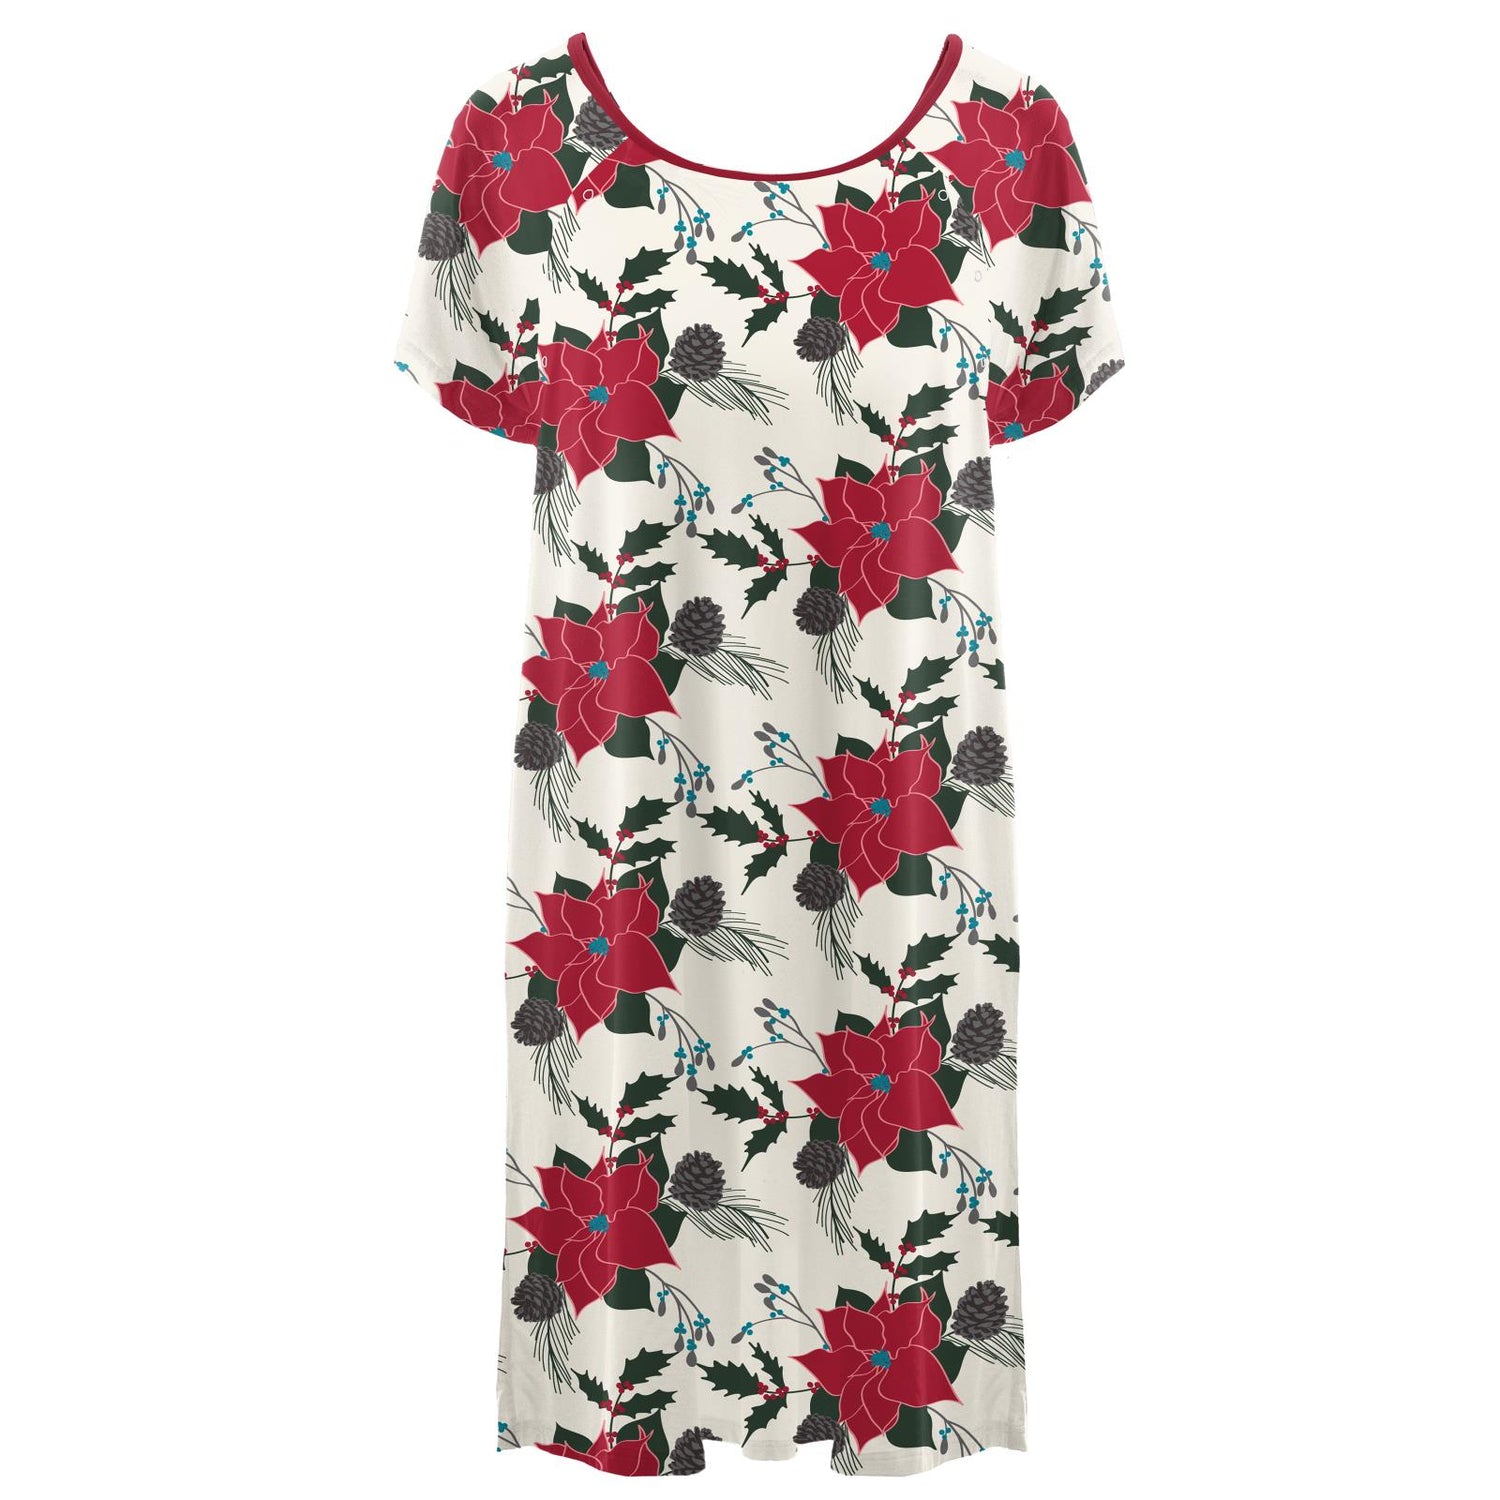 Women's Print Hospital Gown in Christmas Floral